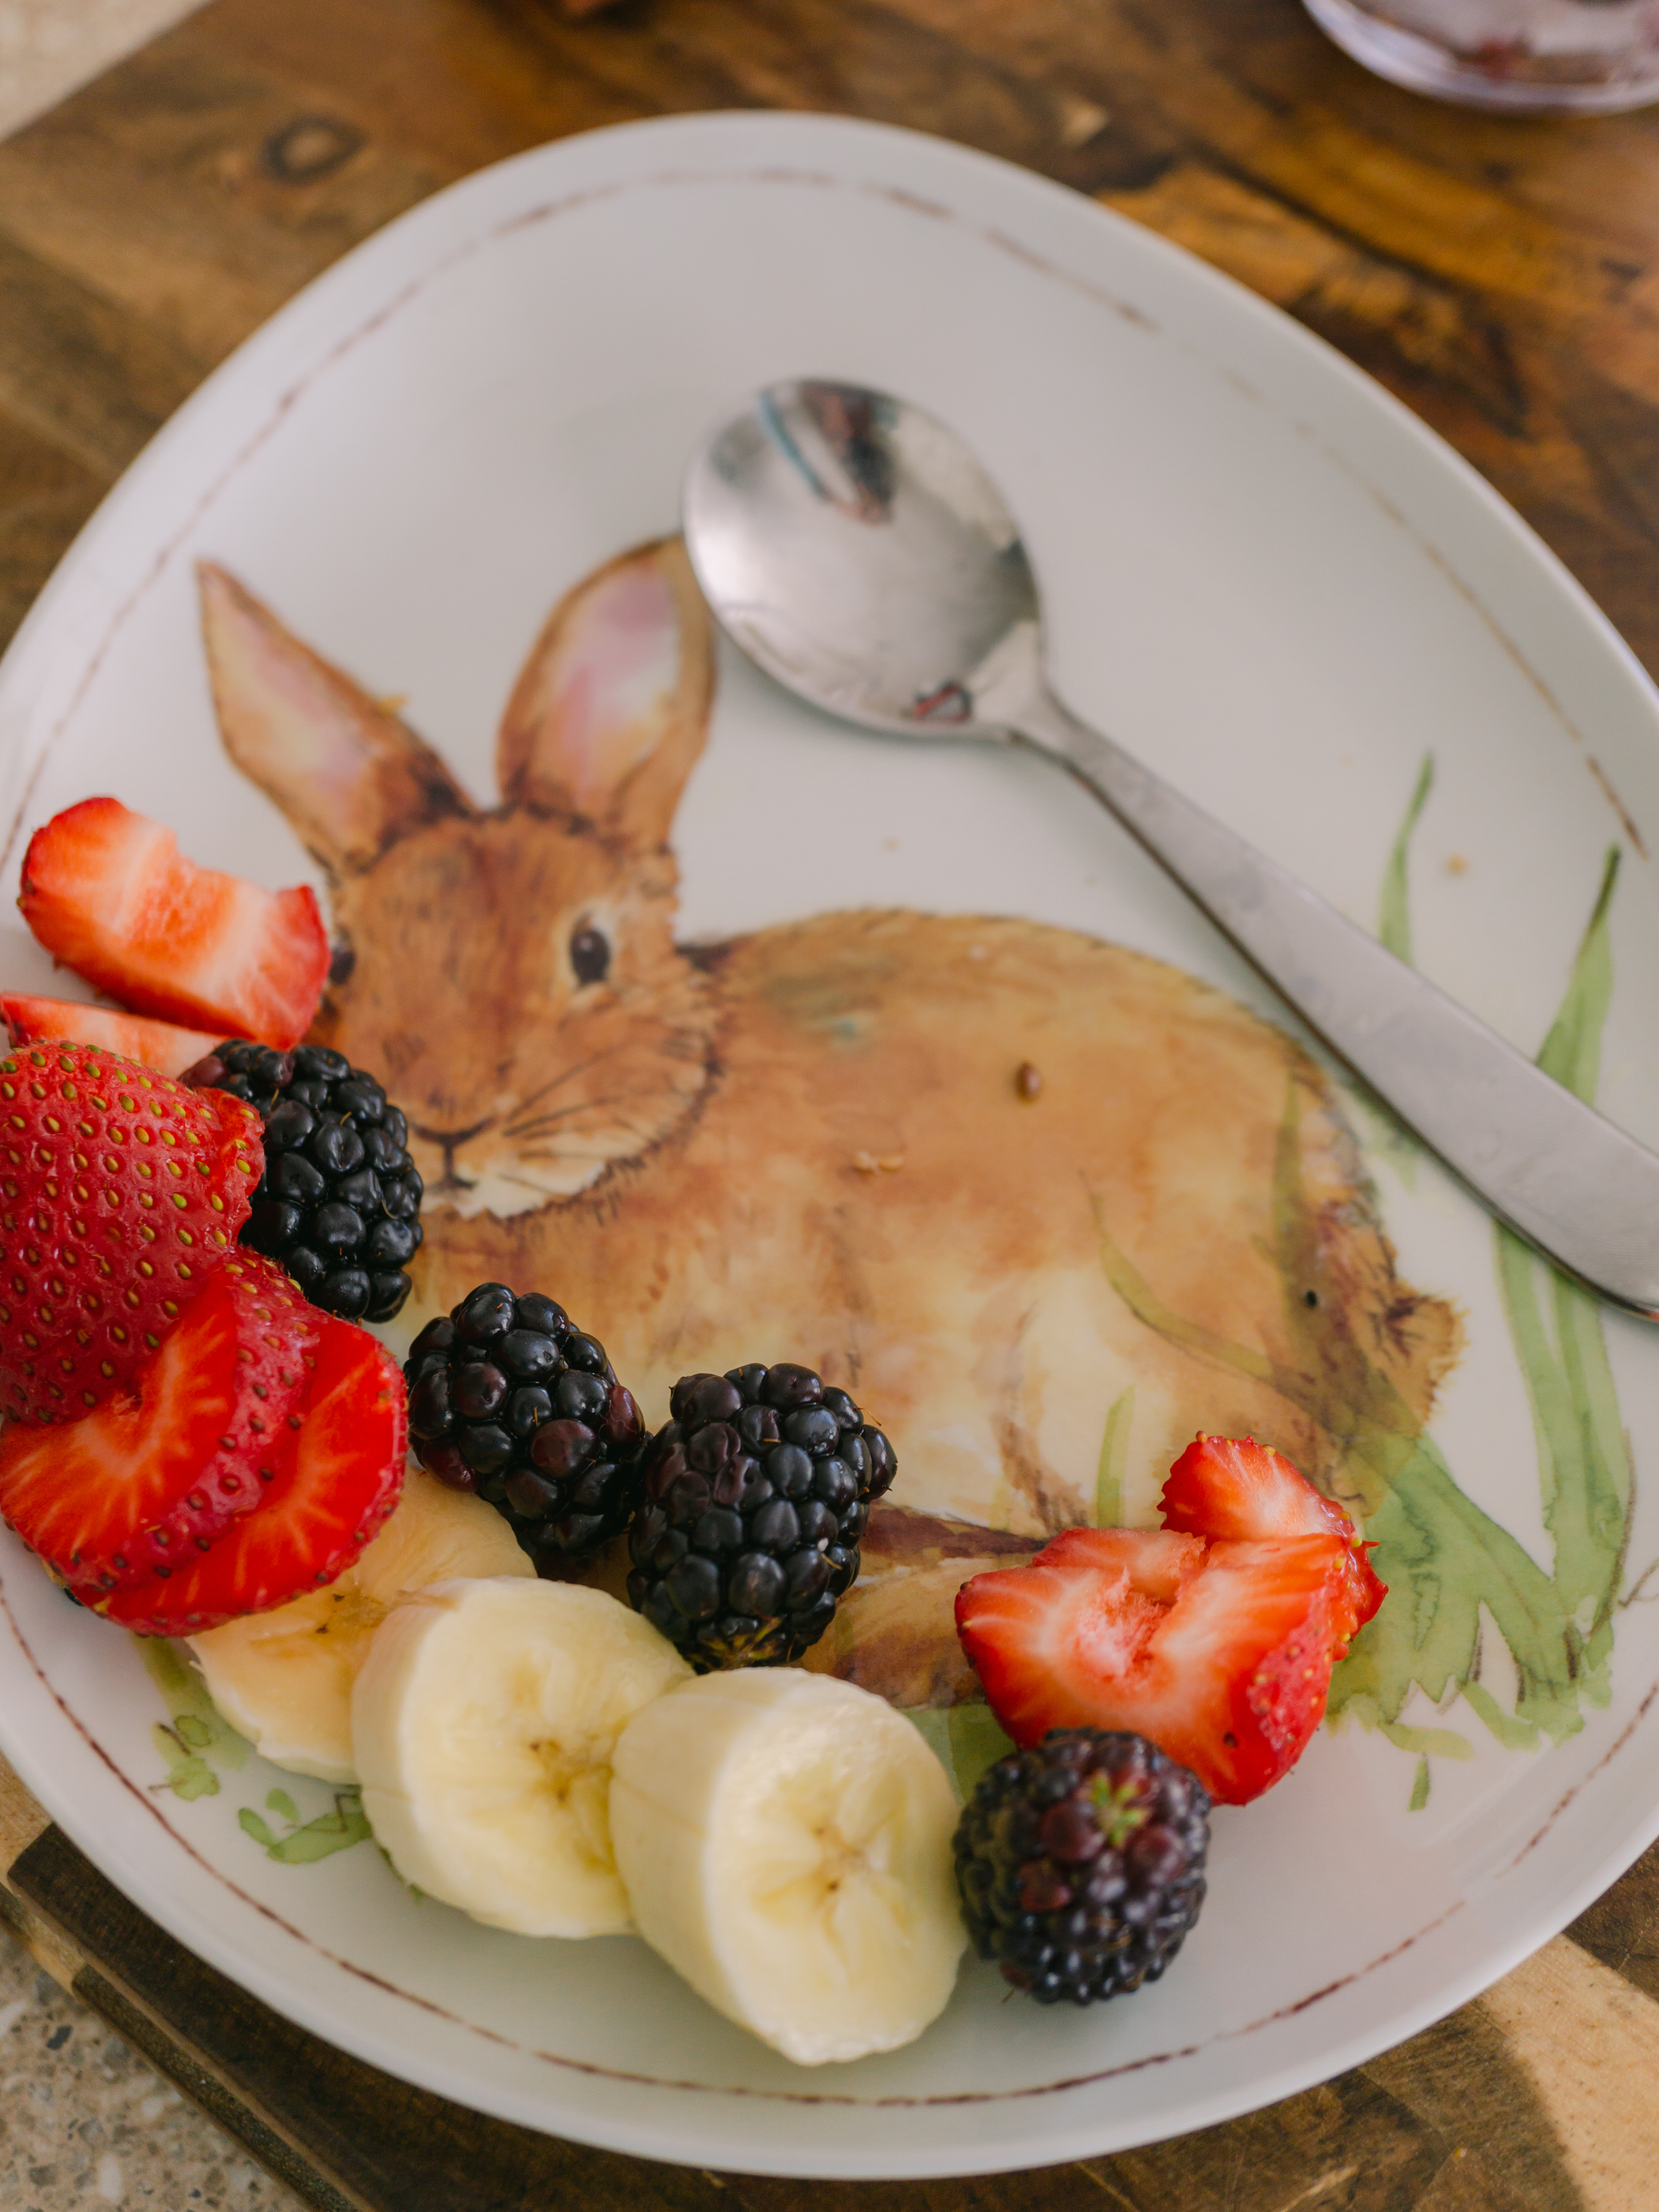 Bunny plate with blackberries and strawberries